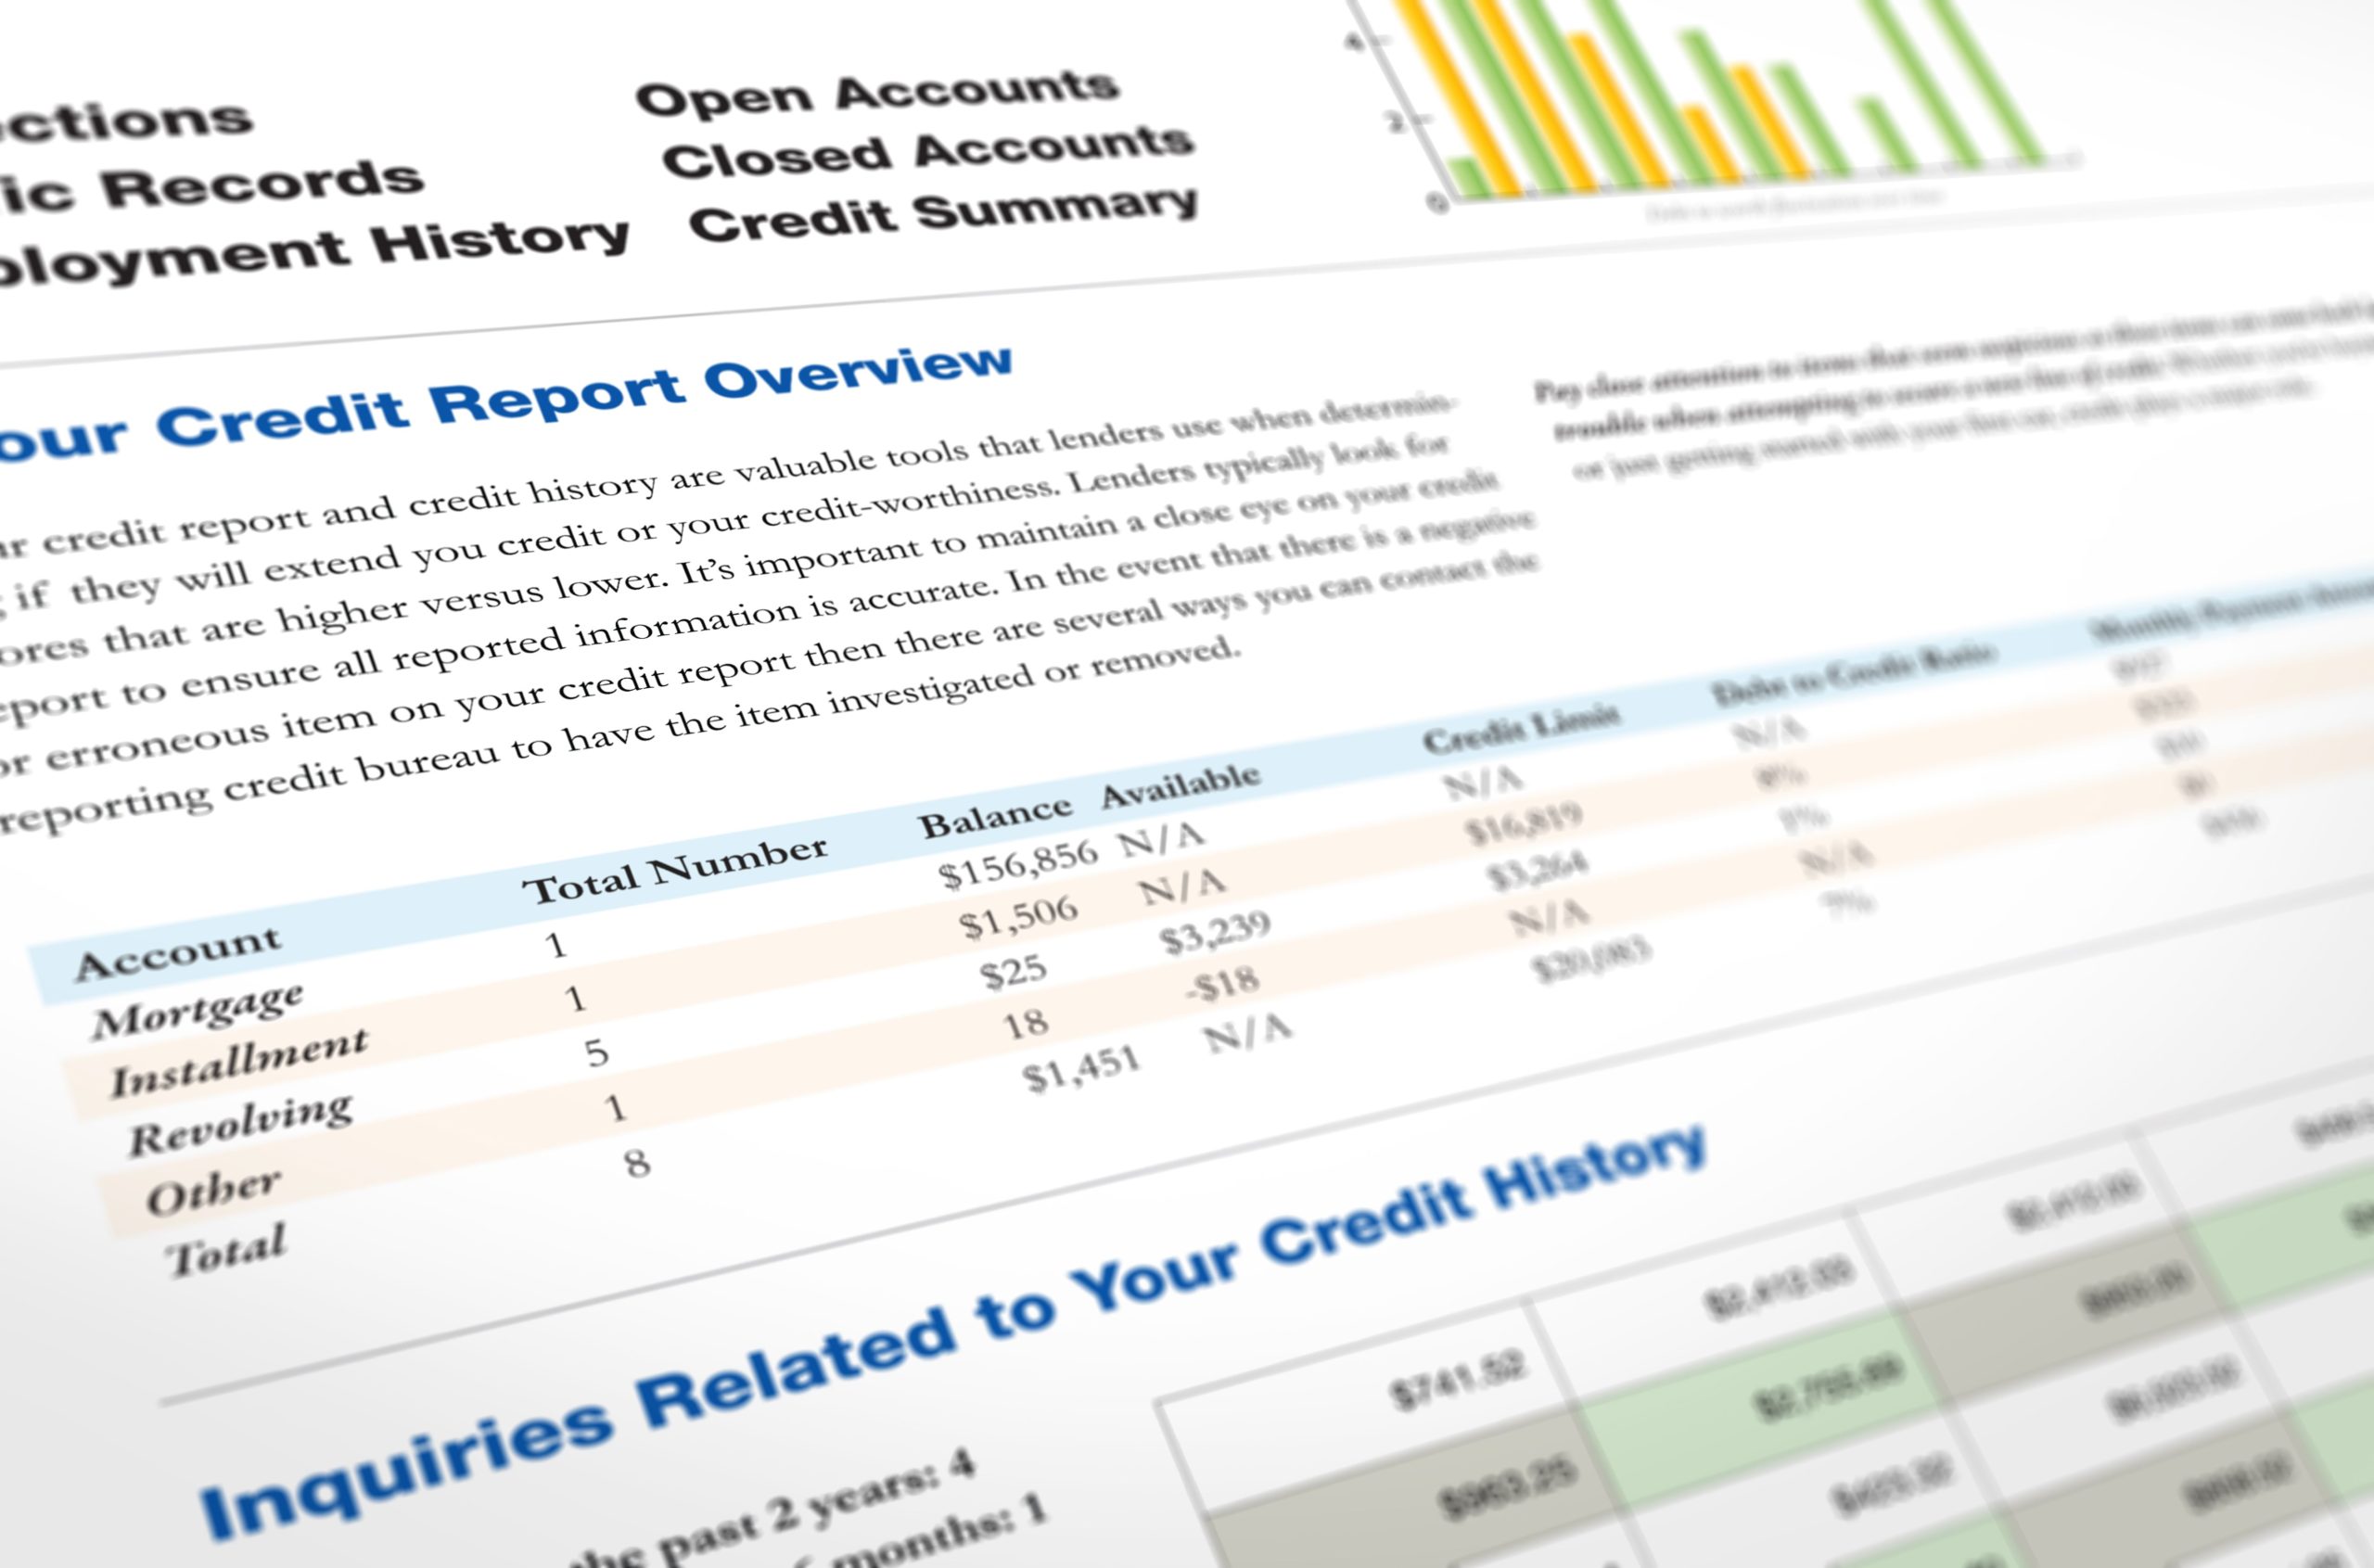 How Long Does Negative Information Stay on Your Credit Report?